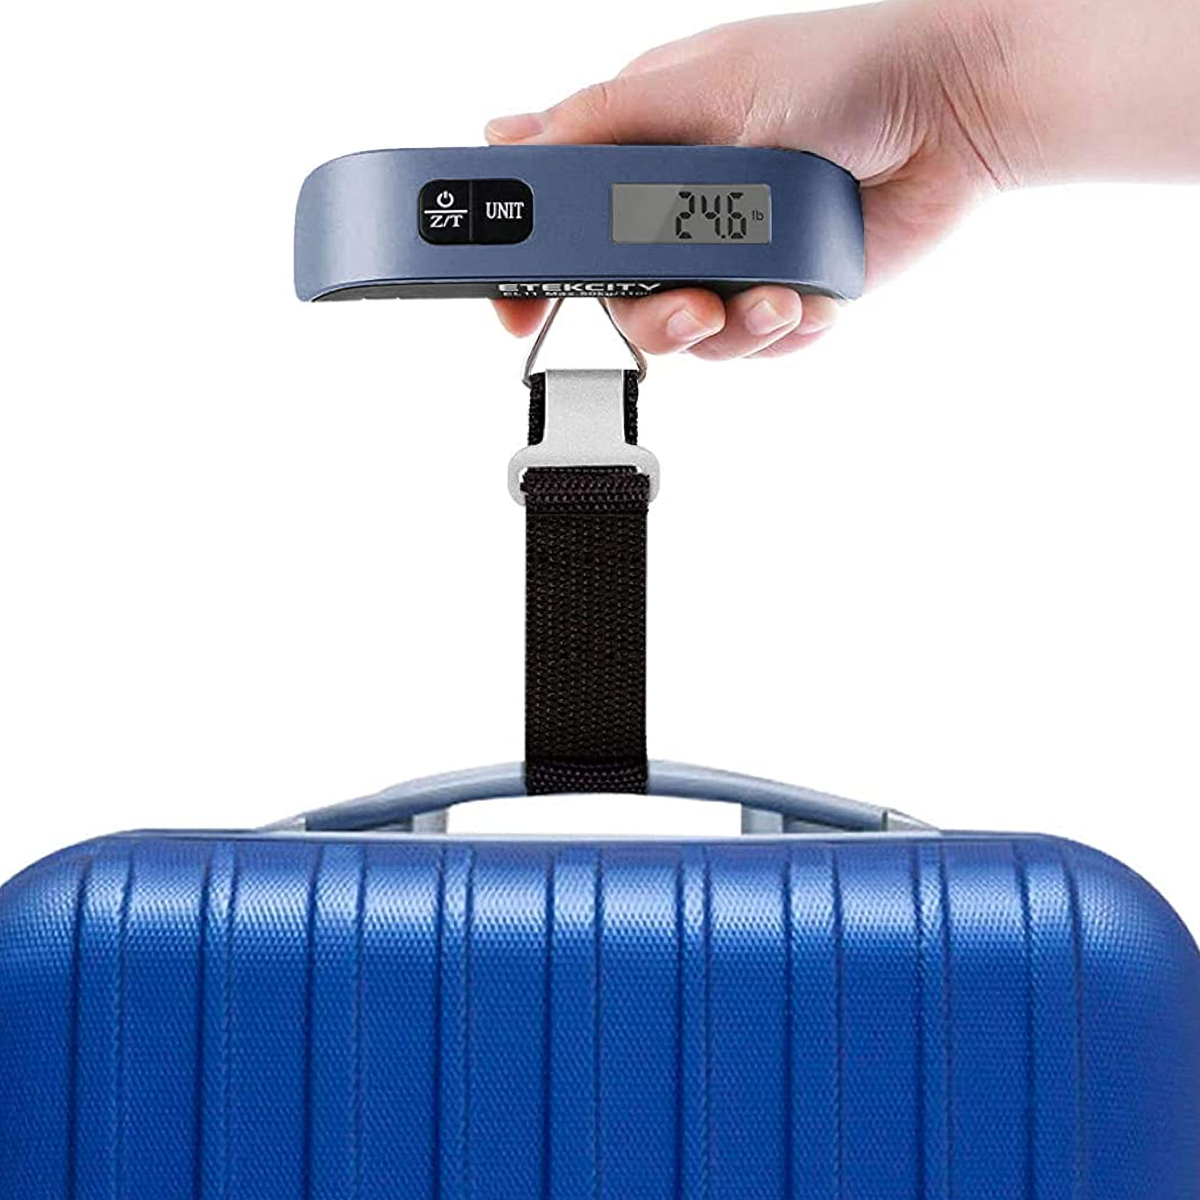 Etekcity Digital Hanging Luggage Scale (two-pack) is $20 at